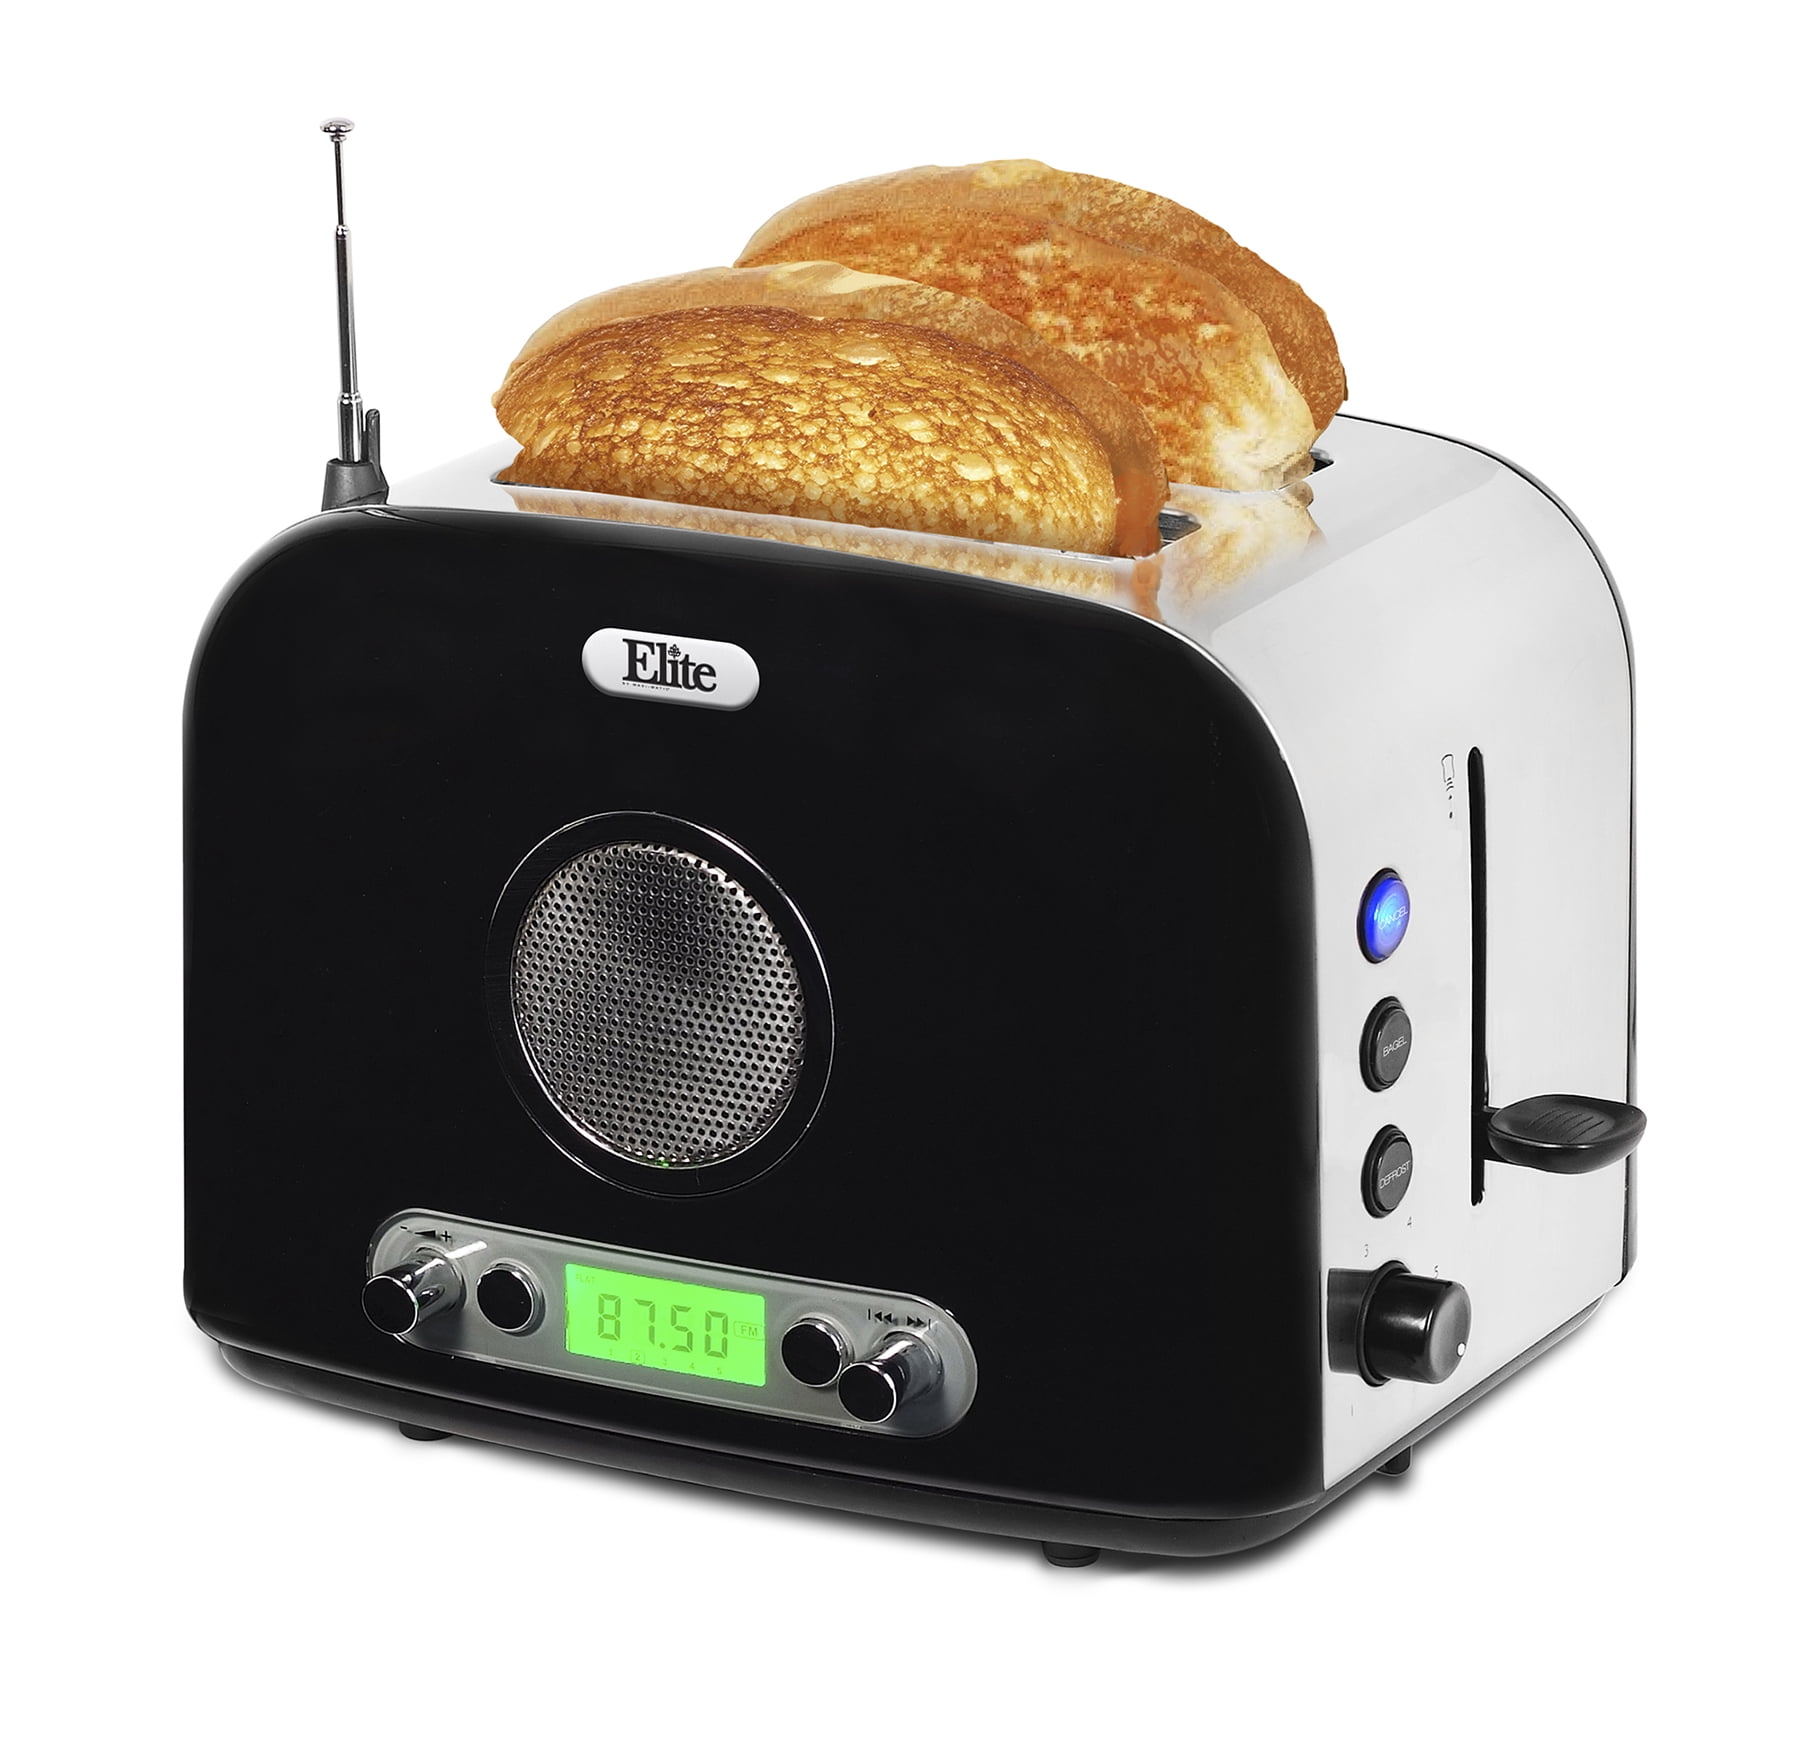 Two-Slice Toaster – Café Express Finish Toaster 